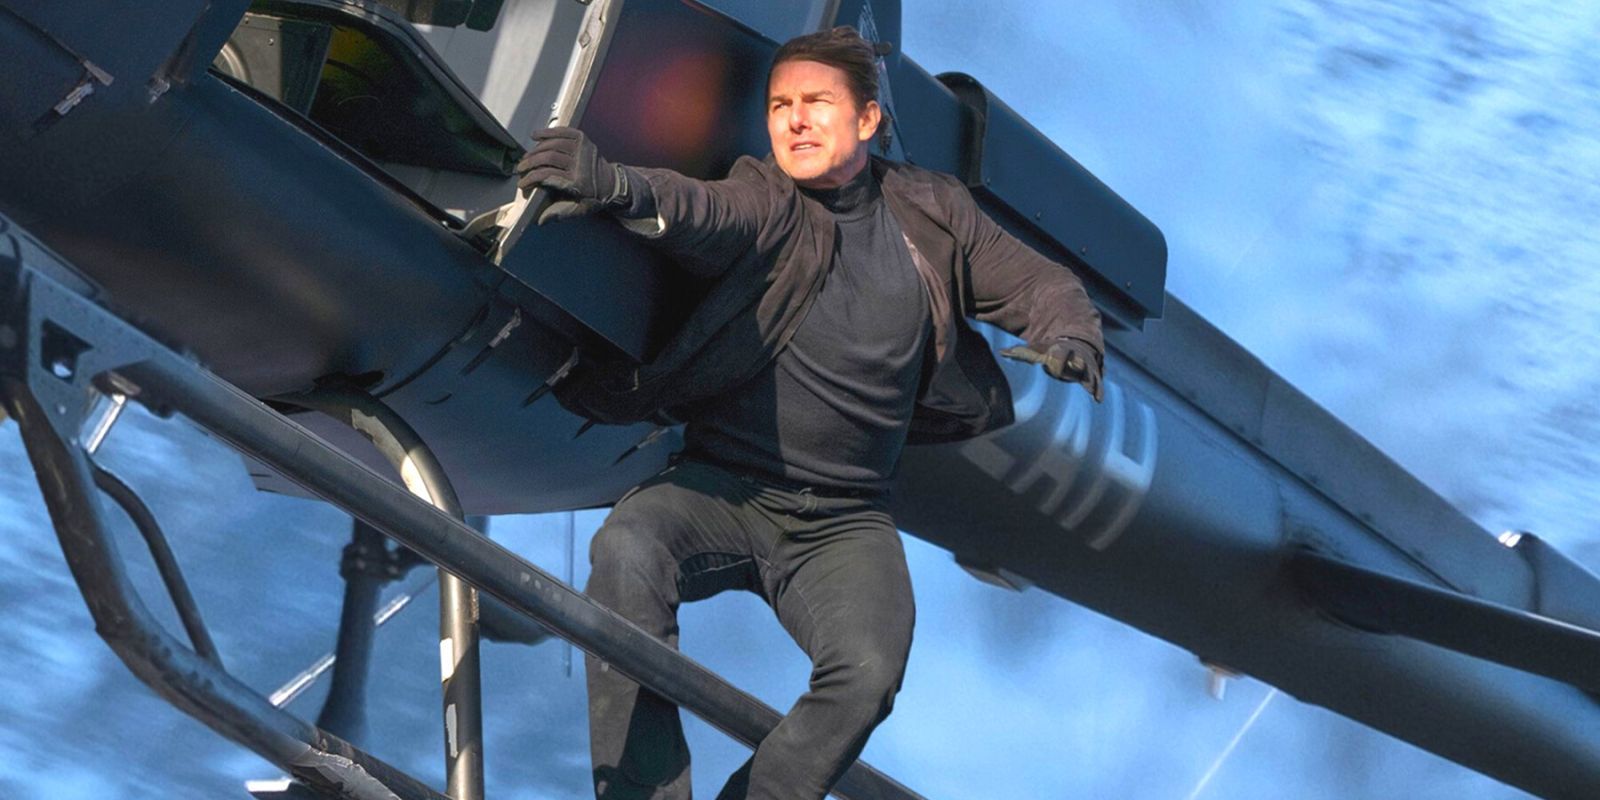 Tom Cruise dangling from the side of an airborne helicopter